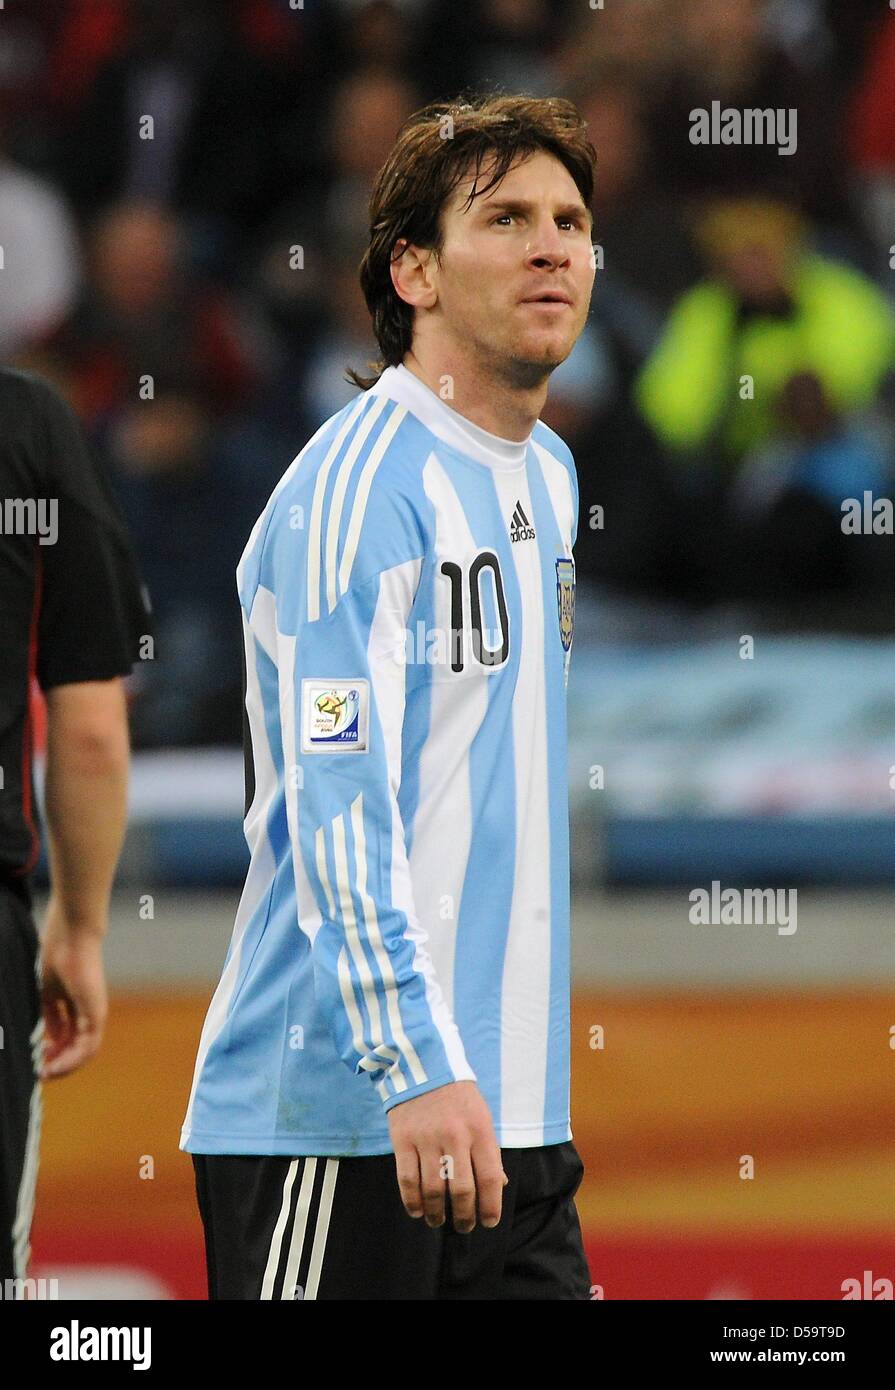 Argentina's Lionel Messi reacts after the 2010 FIFA World Cup quarterfinal match between Argentina and Germany at the Green Point Stadium in Cape Town, South Africa 03 July 2010. Photo: Marcus Brandt dpa - Please refer to http://dpaq.de/FIFA-WM2010-TC  +++(c) dpa - Bildfunk+++ Stock Photo